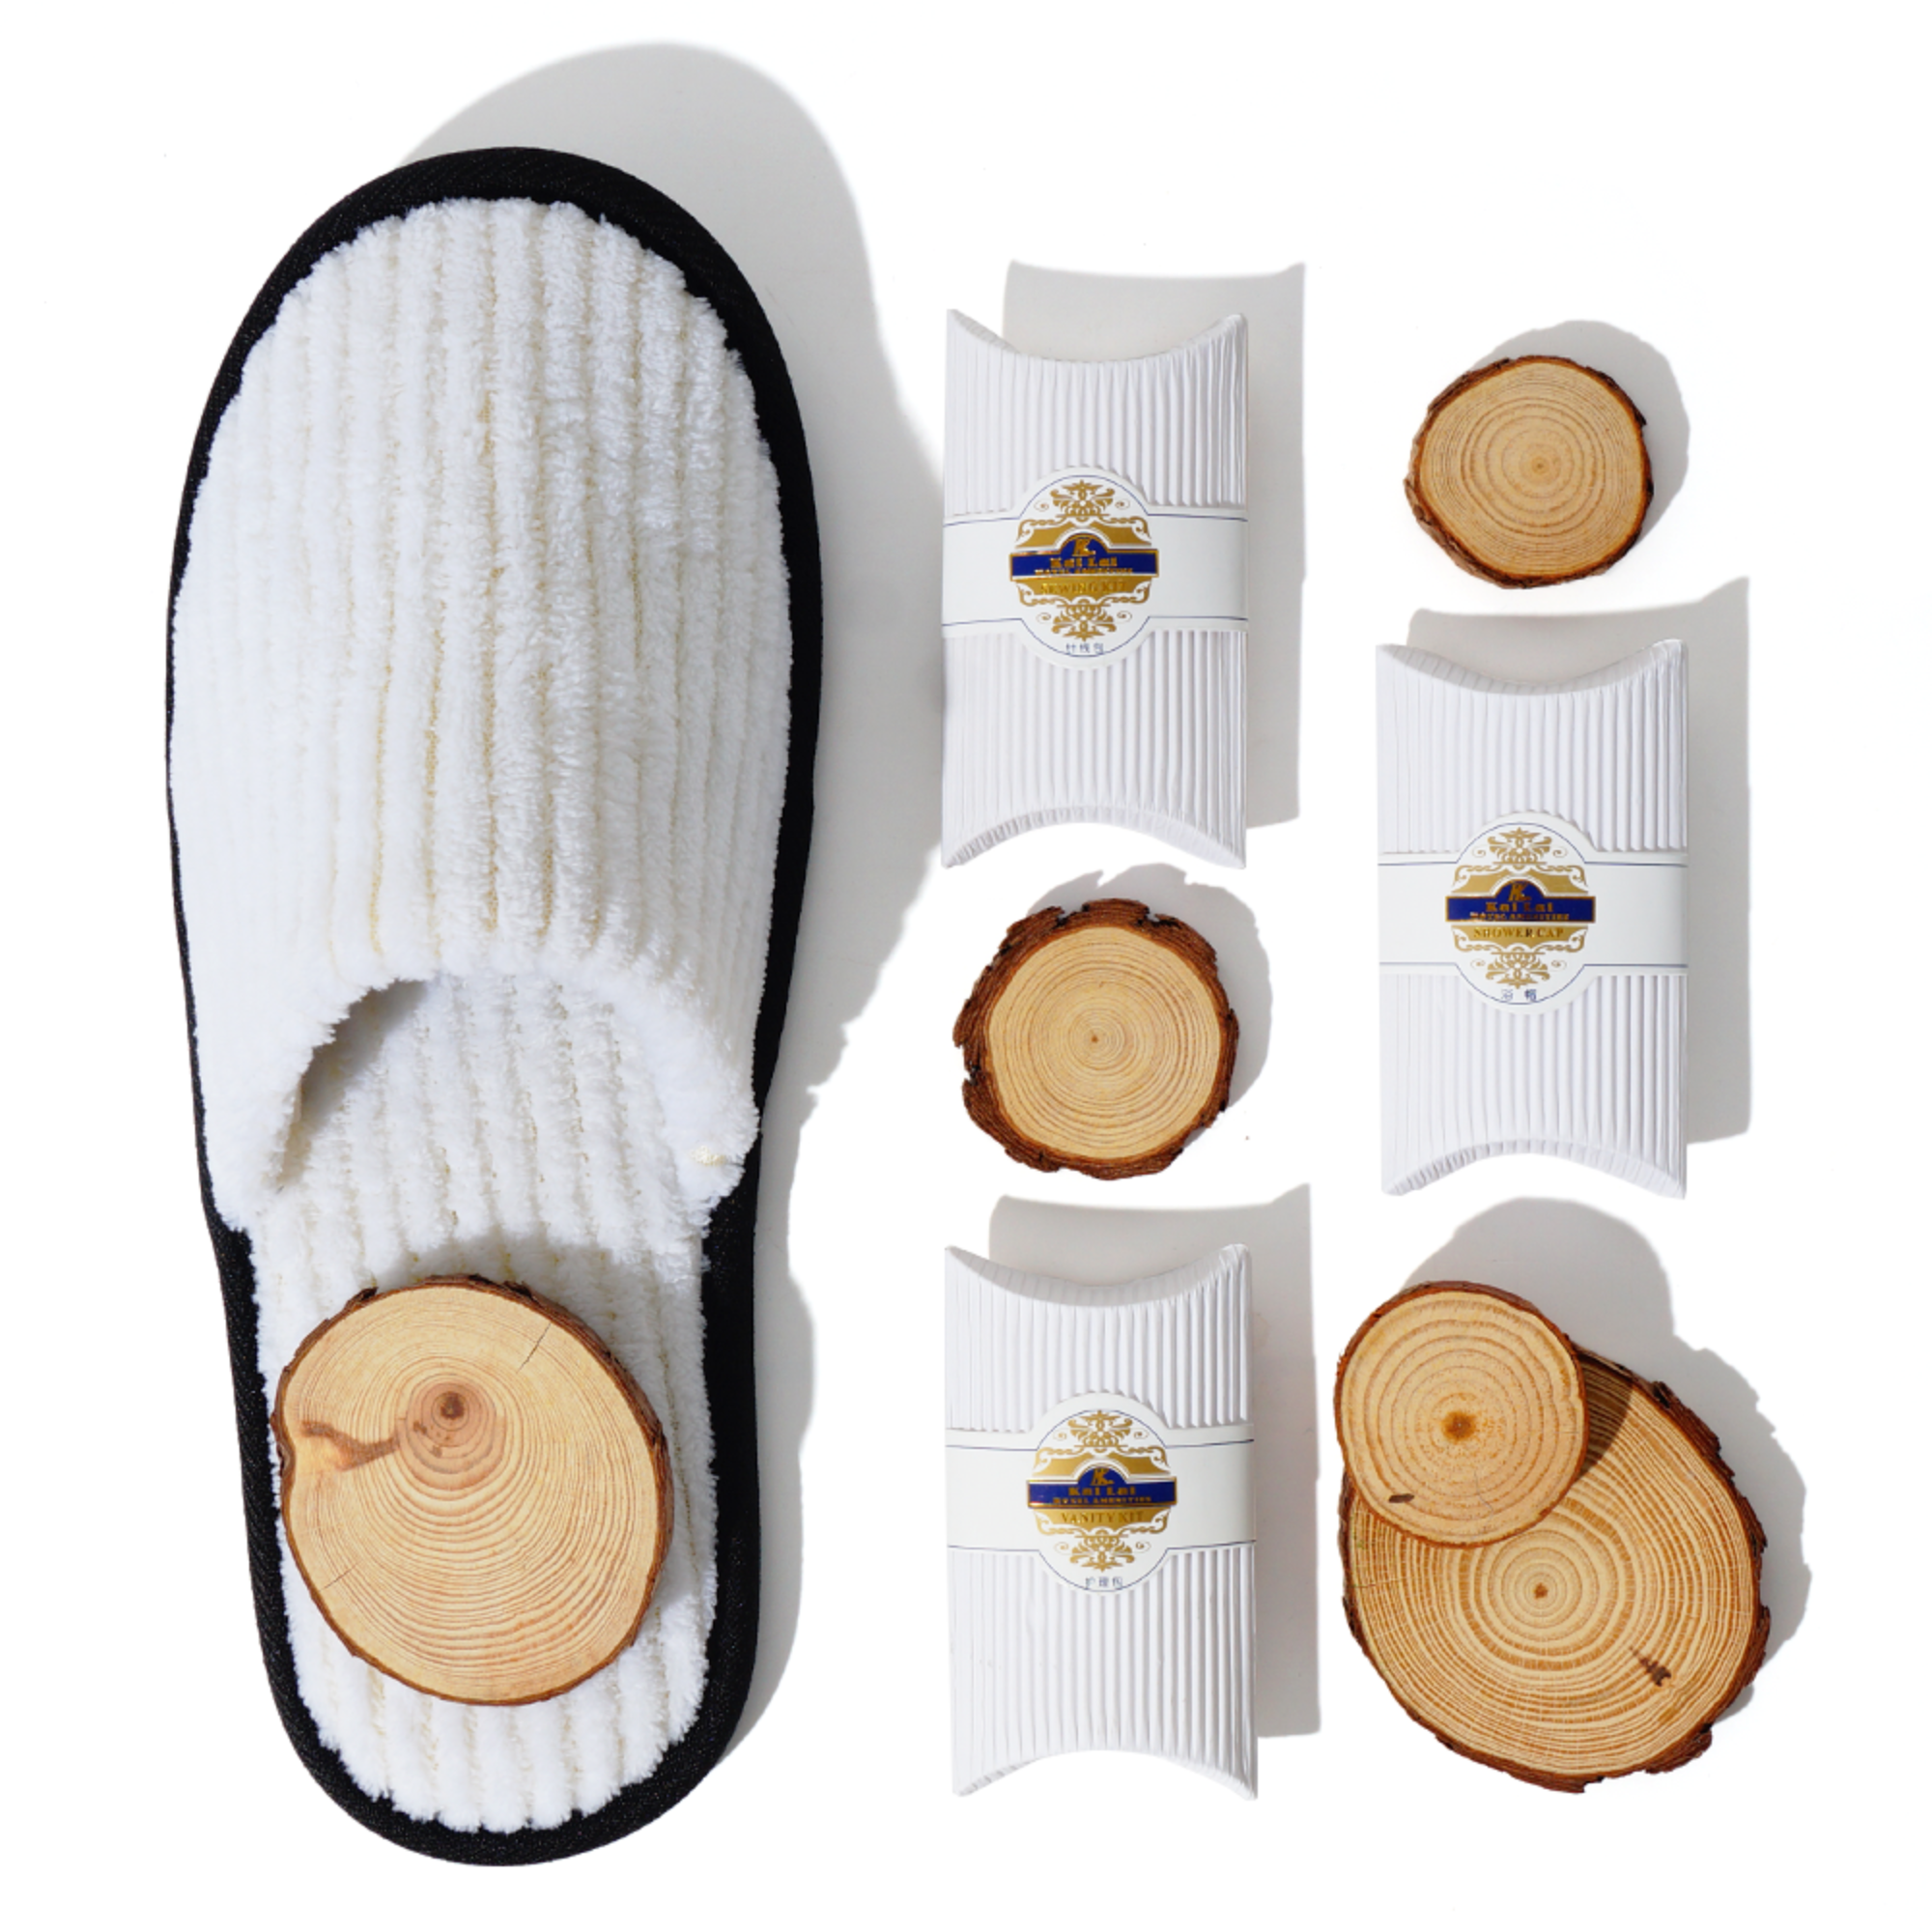 Star Hotel Luxury Hotel Amenities Kit With  Disposable Slippers Toothbrush Shaving Kit 